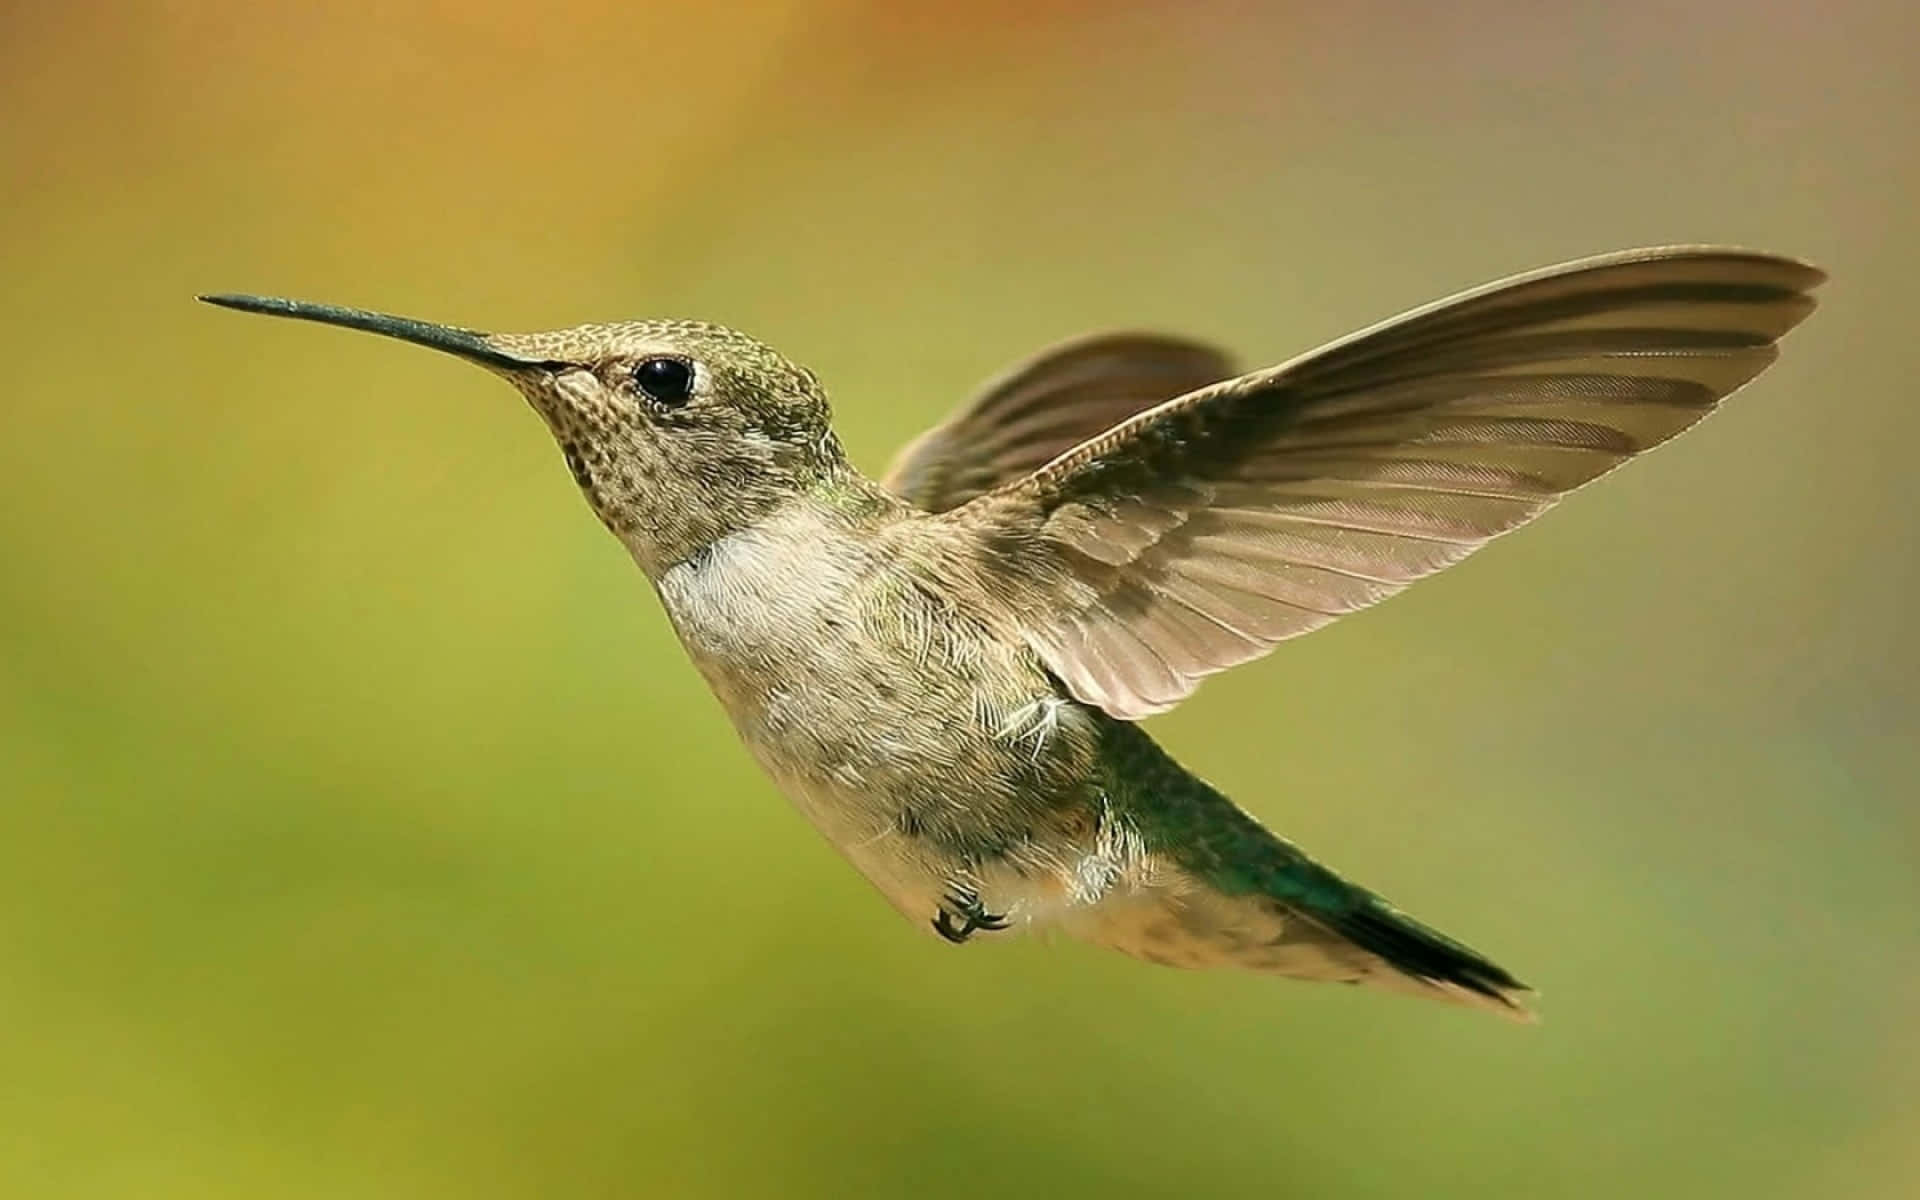 A female hummingbird flaps her wings in search of nectar